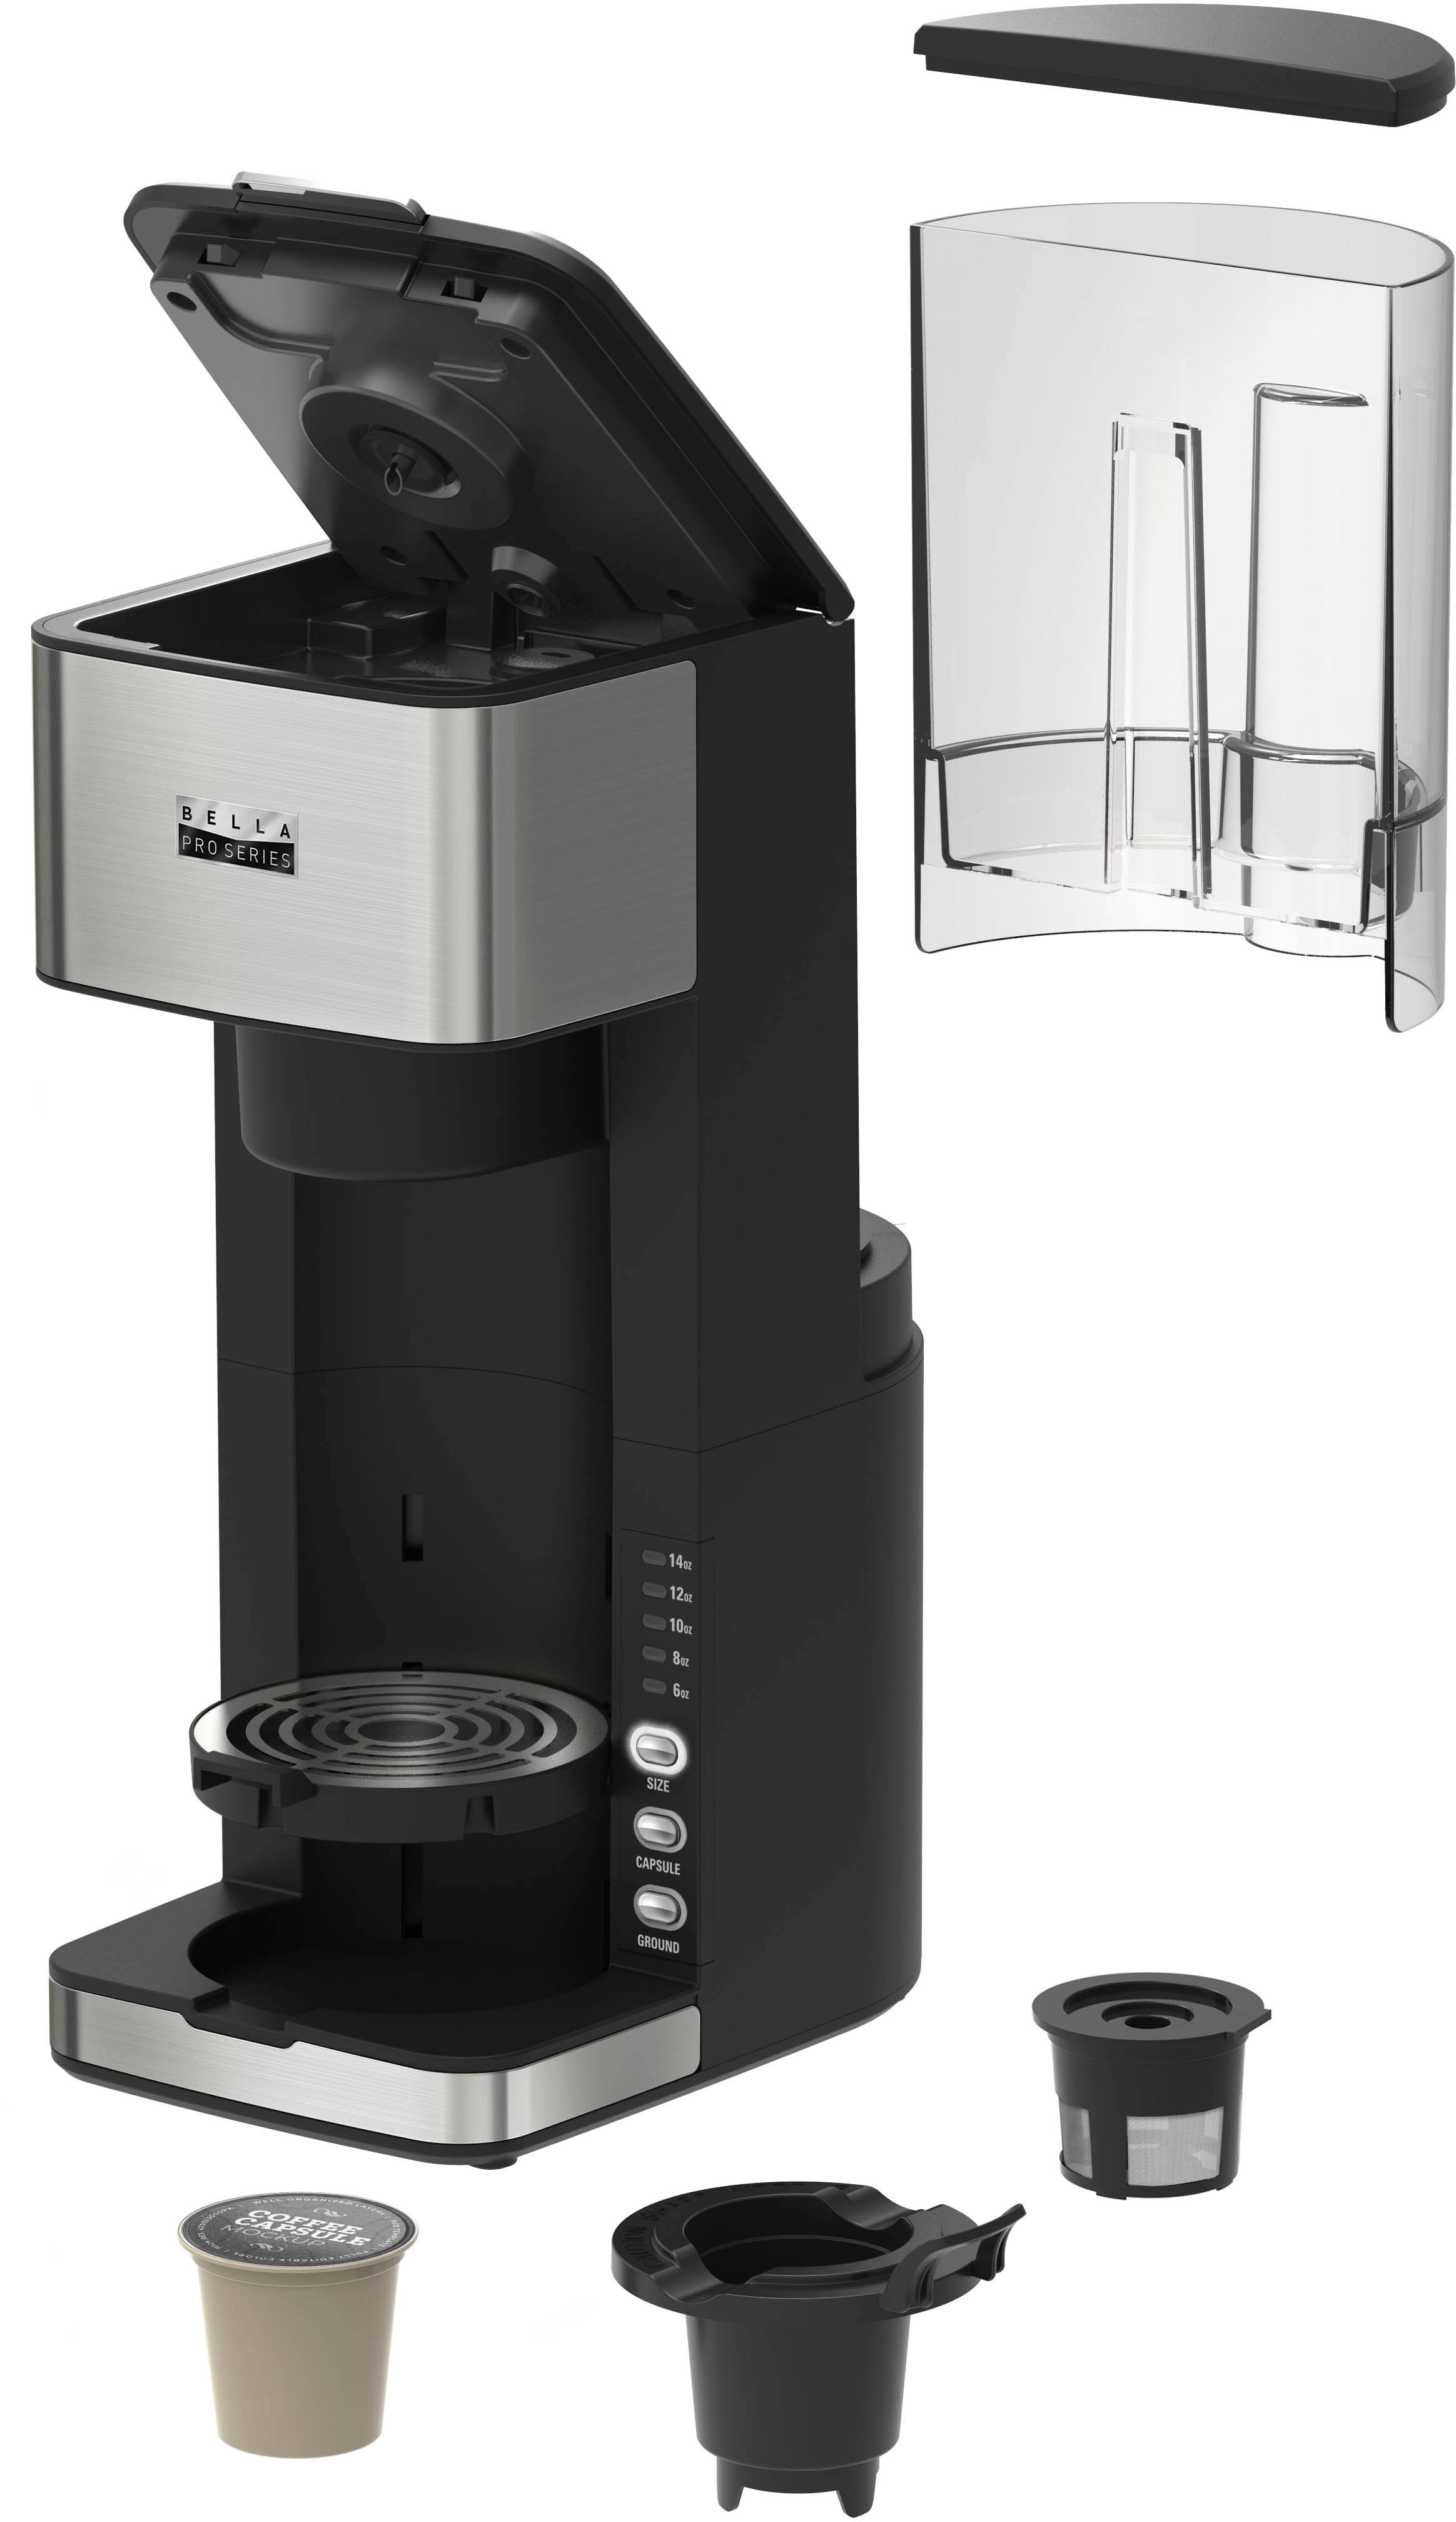 User manual Bella Single Serve Coffee Maker (English - 28 pages)